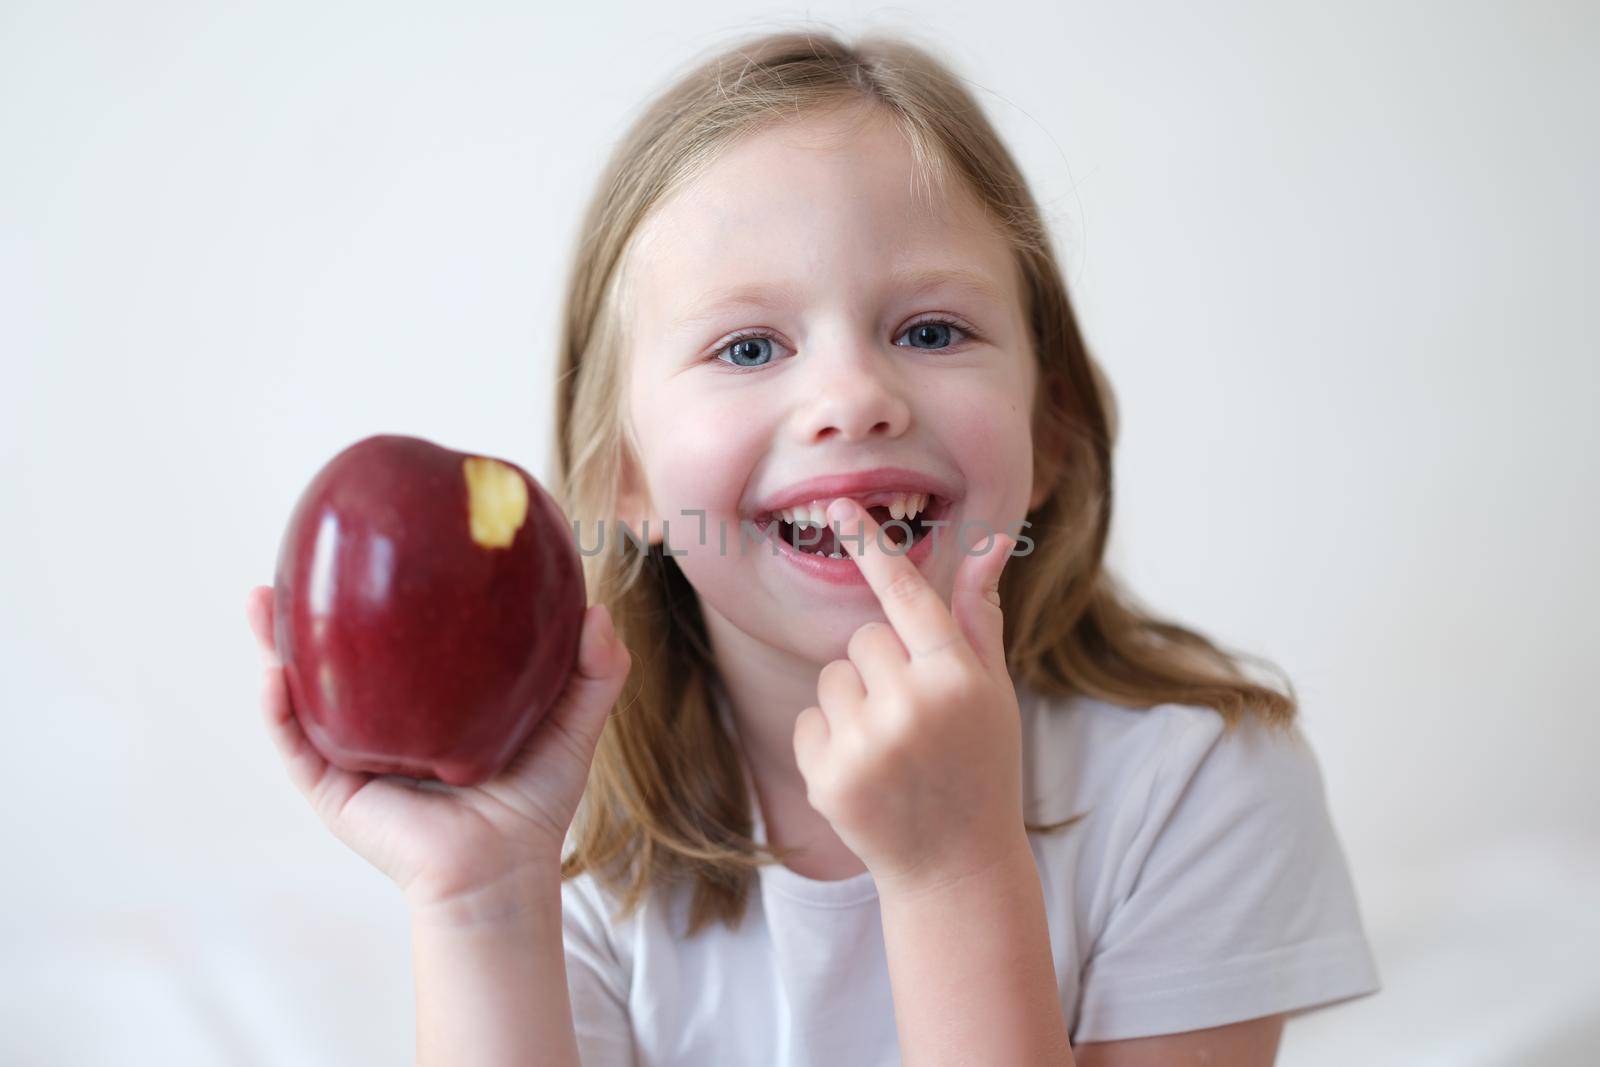 Smiling girl without tooth is holding apple. Pediatric dentistry and loss of milk teeth concept